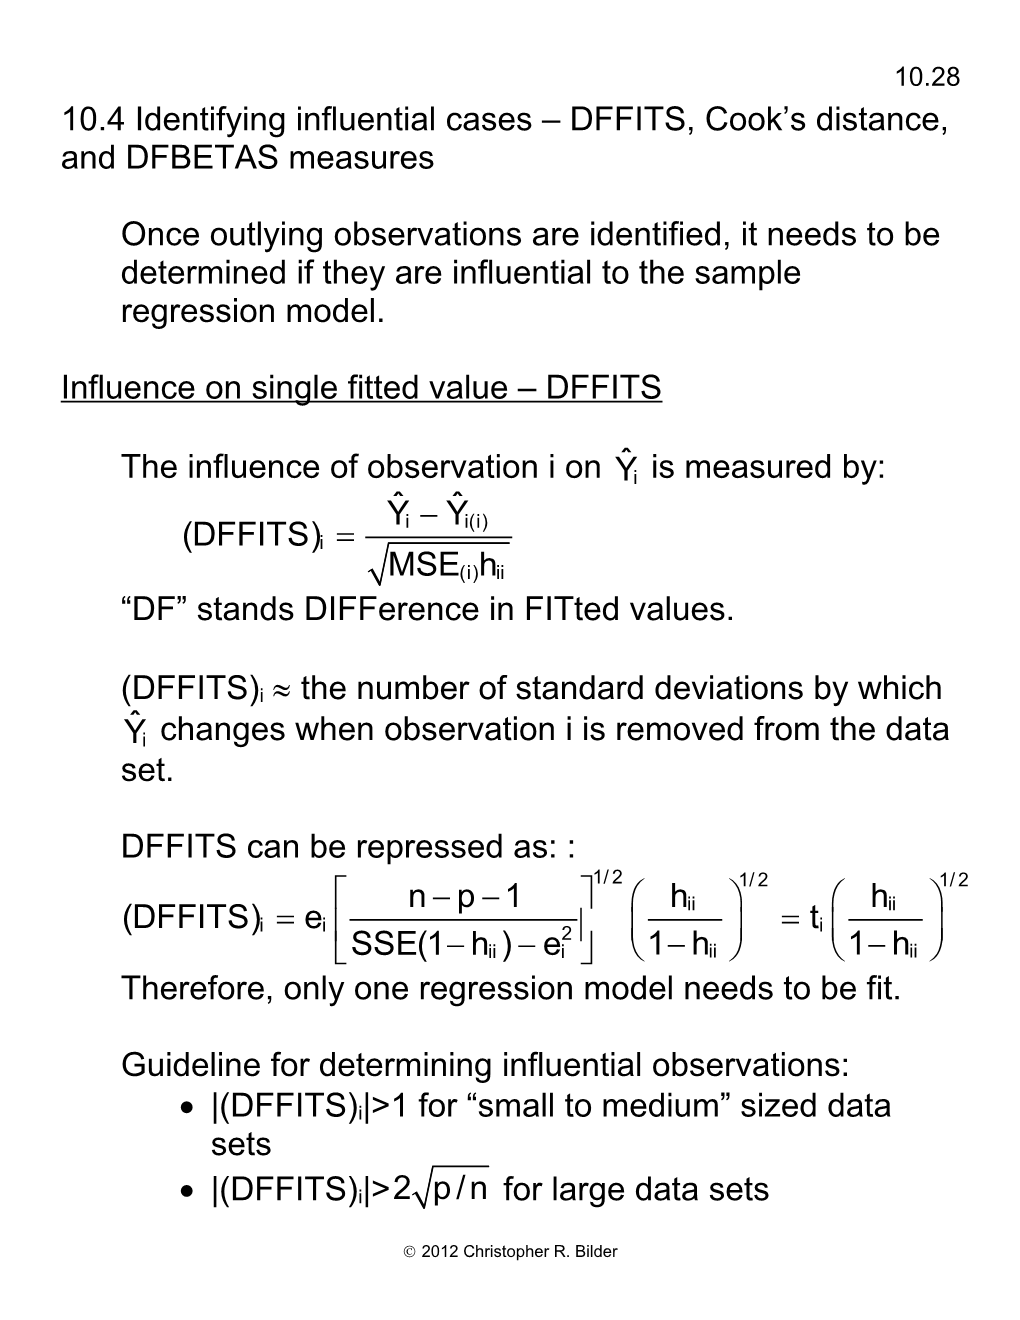 10.4 Identifying Influential Cases DFFITS, Cook S Distance, and DFBETAS Measures